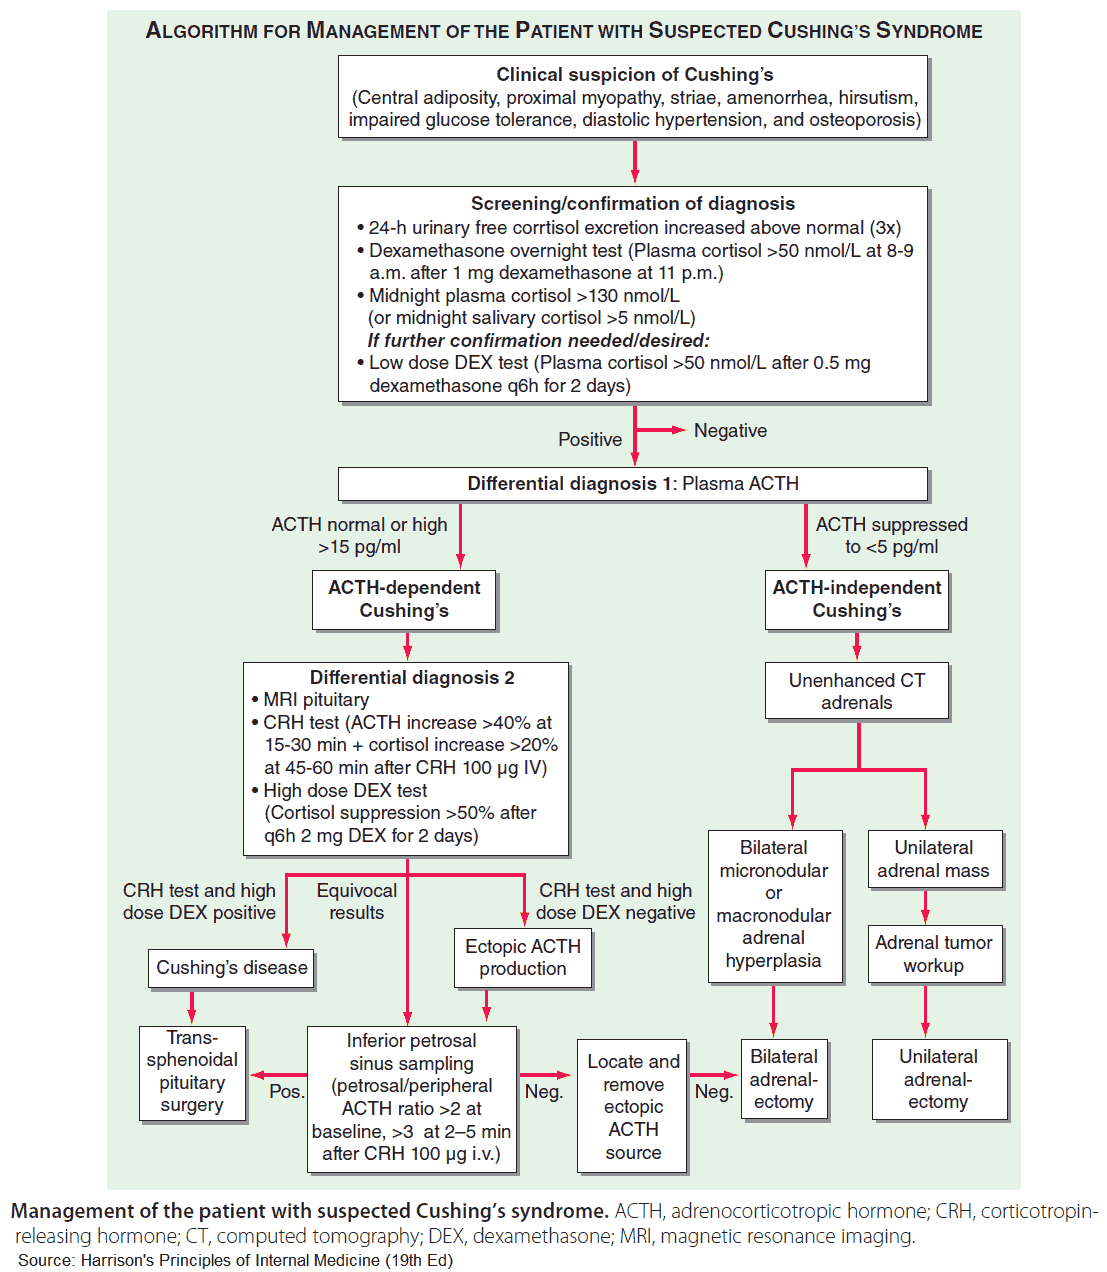 Algorithm for Management of the patient with suspected Cushing’s syndrome